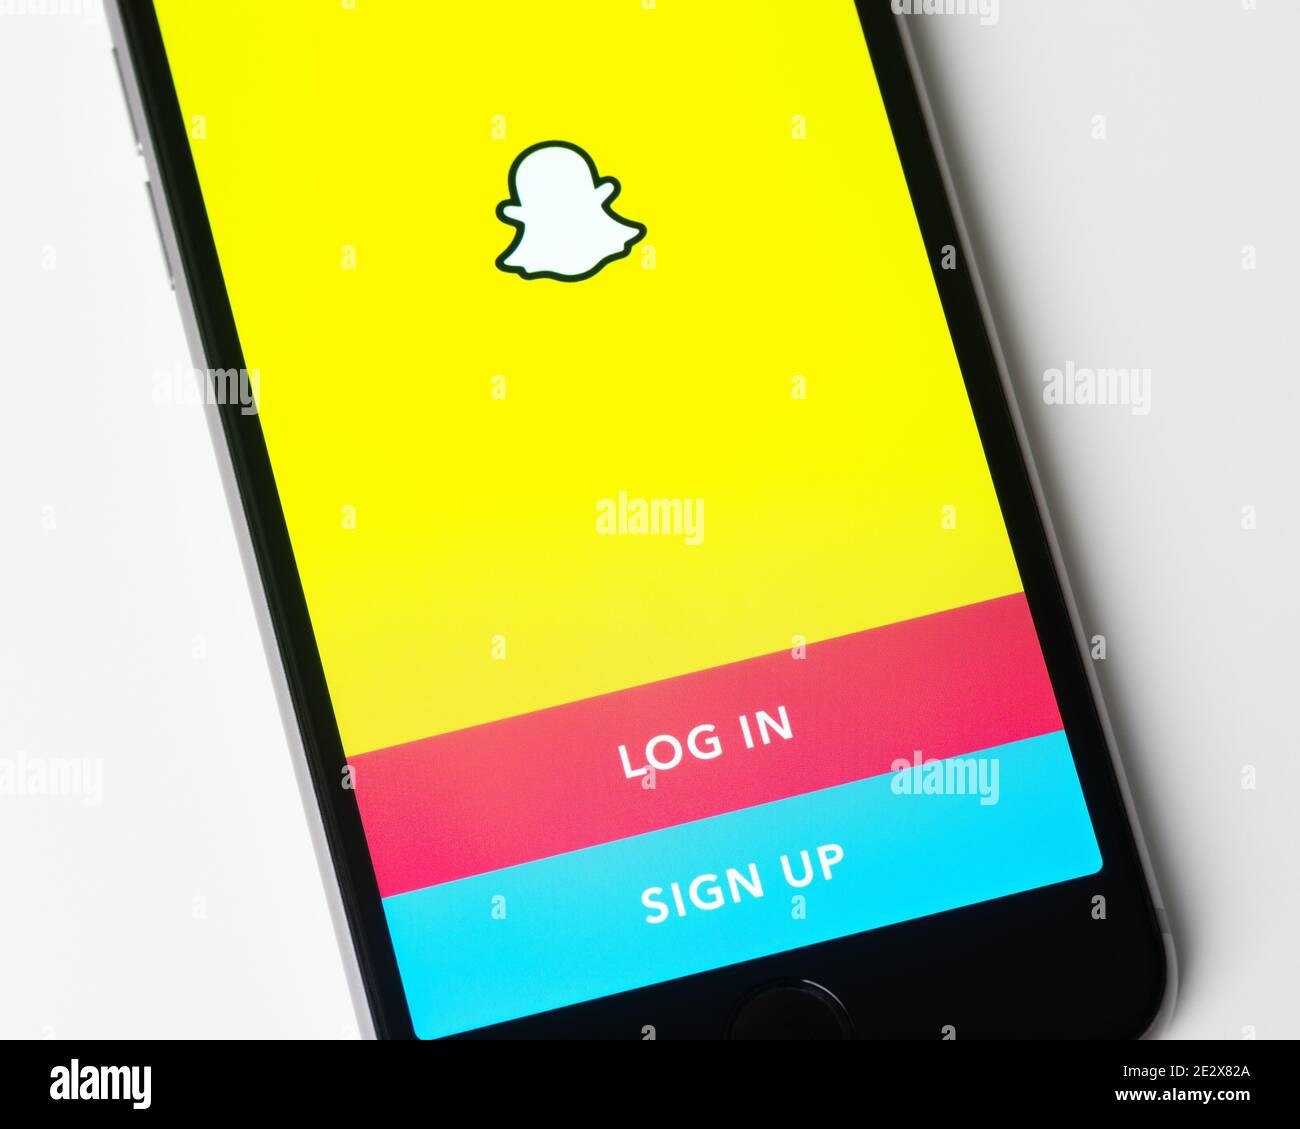 Snapchat app log in and sign up page on Apple iPhone screen. Snapchat is a multimedia messaging app developed by Snap Inc. Stock Photo